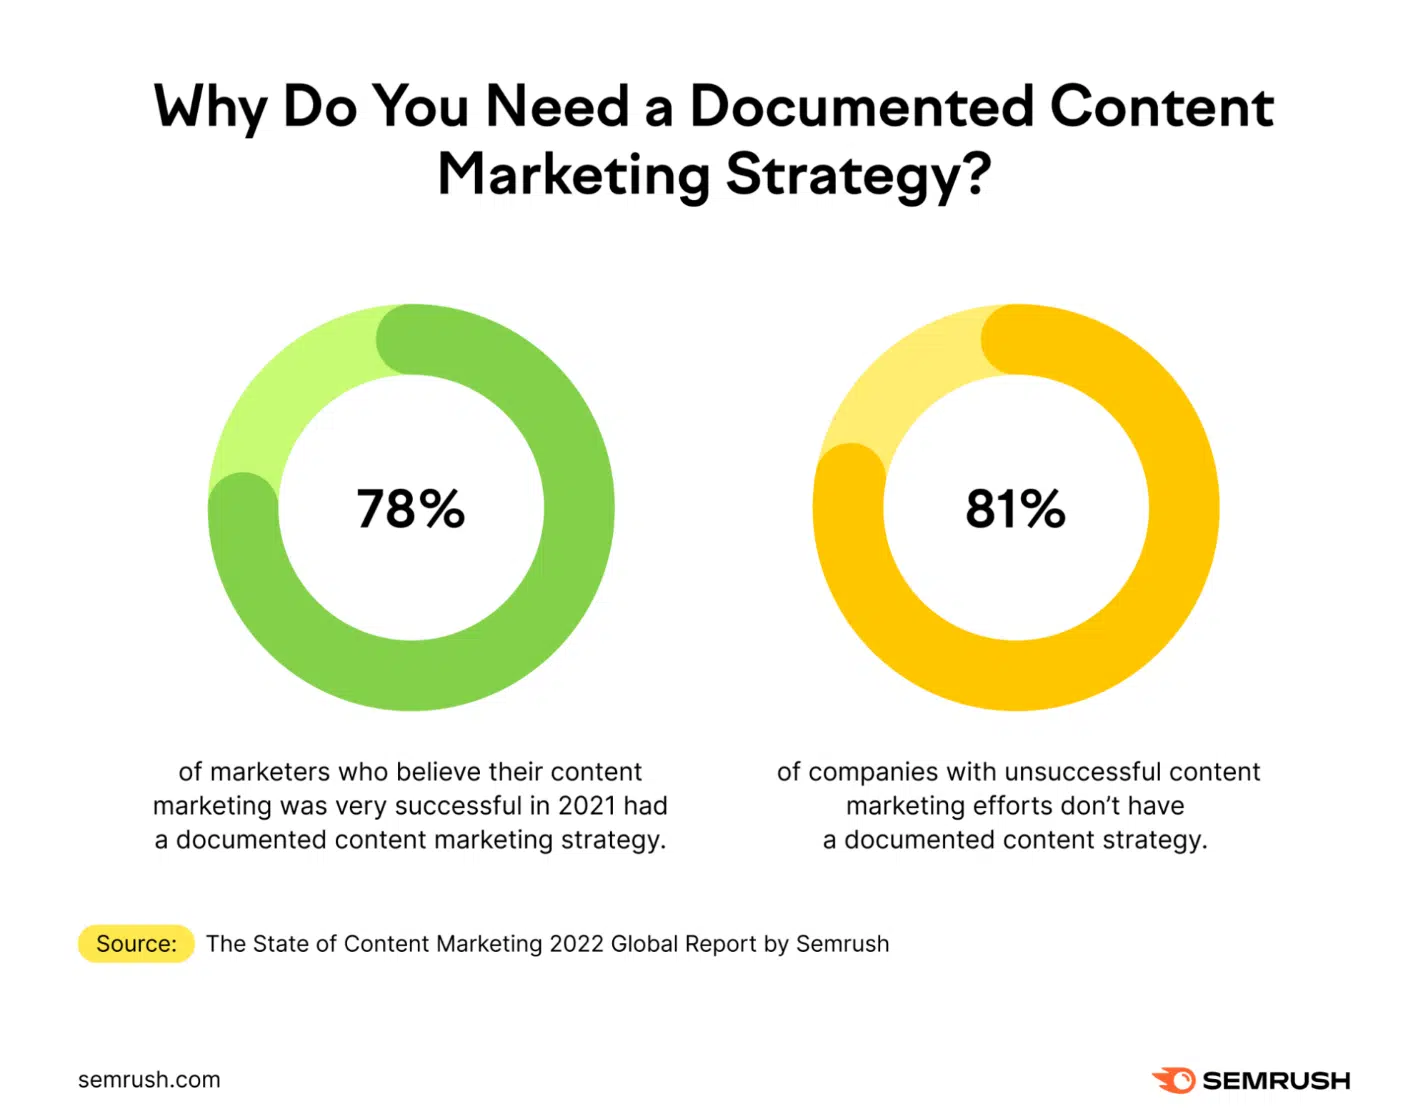 Documented content marketing strategy